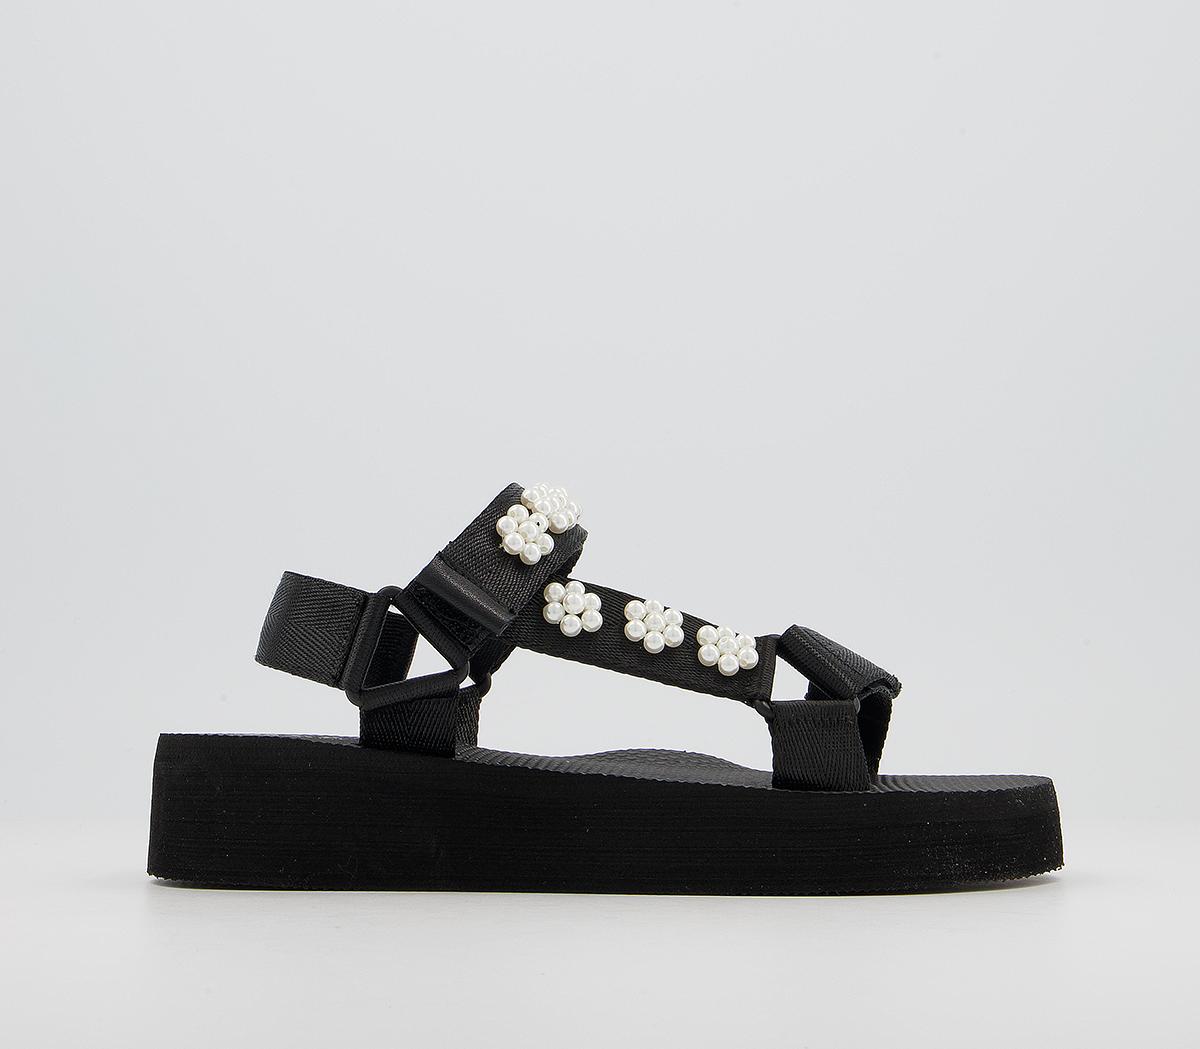 OFFICESaintly Sports SandalsBlack With Embellishment